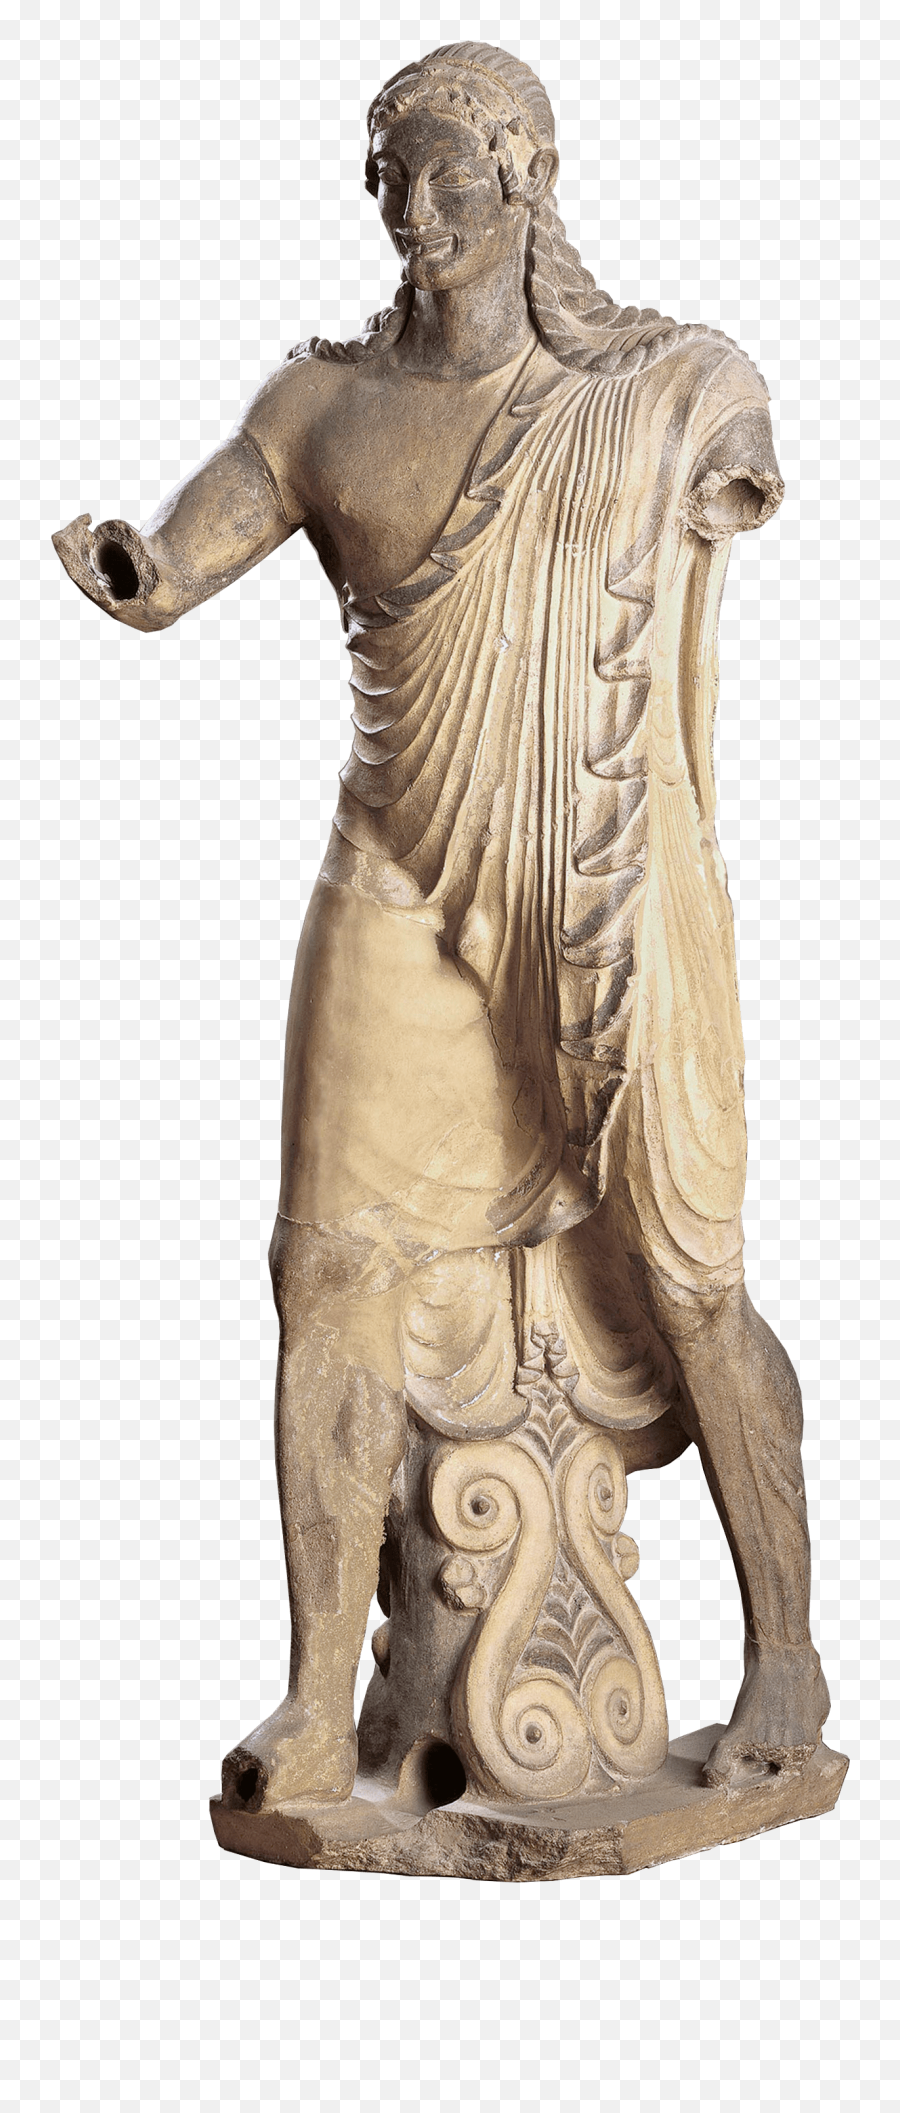 Download Greek Statue With No Arms Png